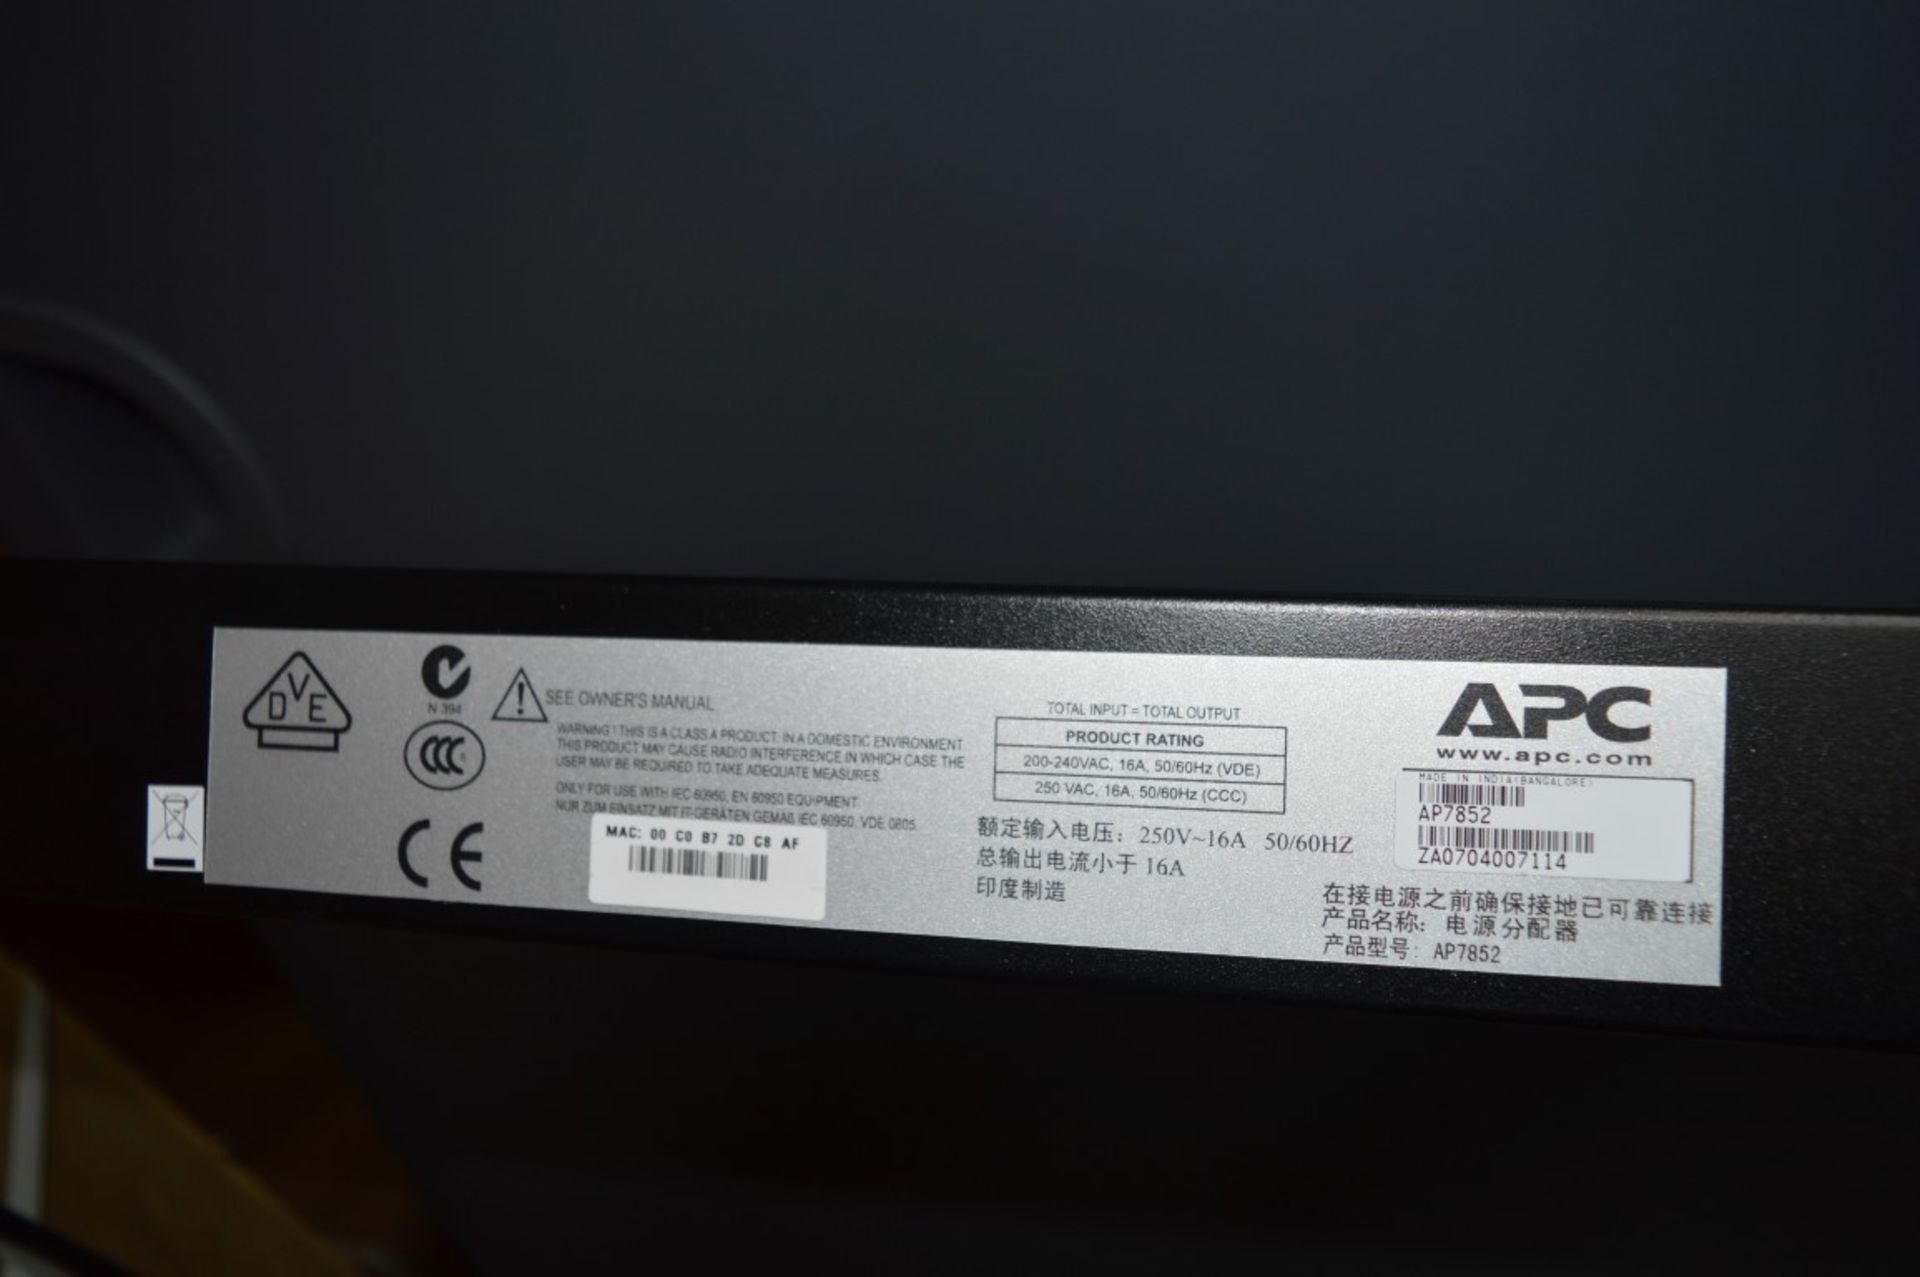 1 x APC Metered Rack PDU - Model AP7852 - 230V 16A - Features 24 Output Connectors - CL106 - Removed - Image 6 of 8